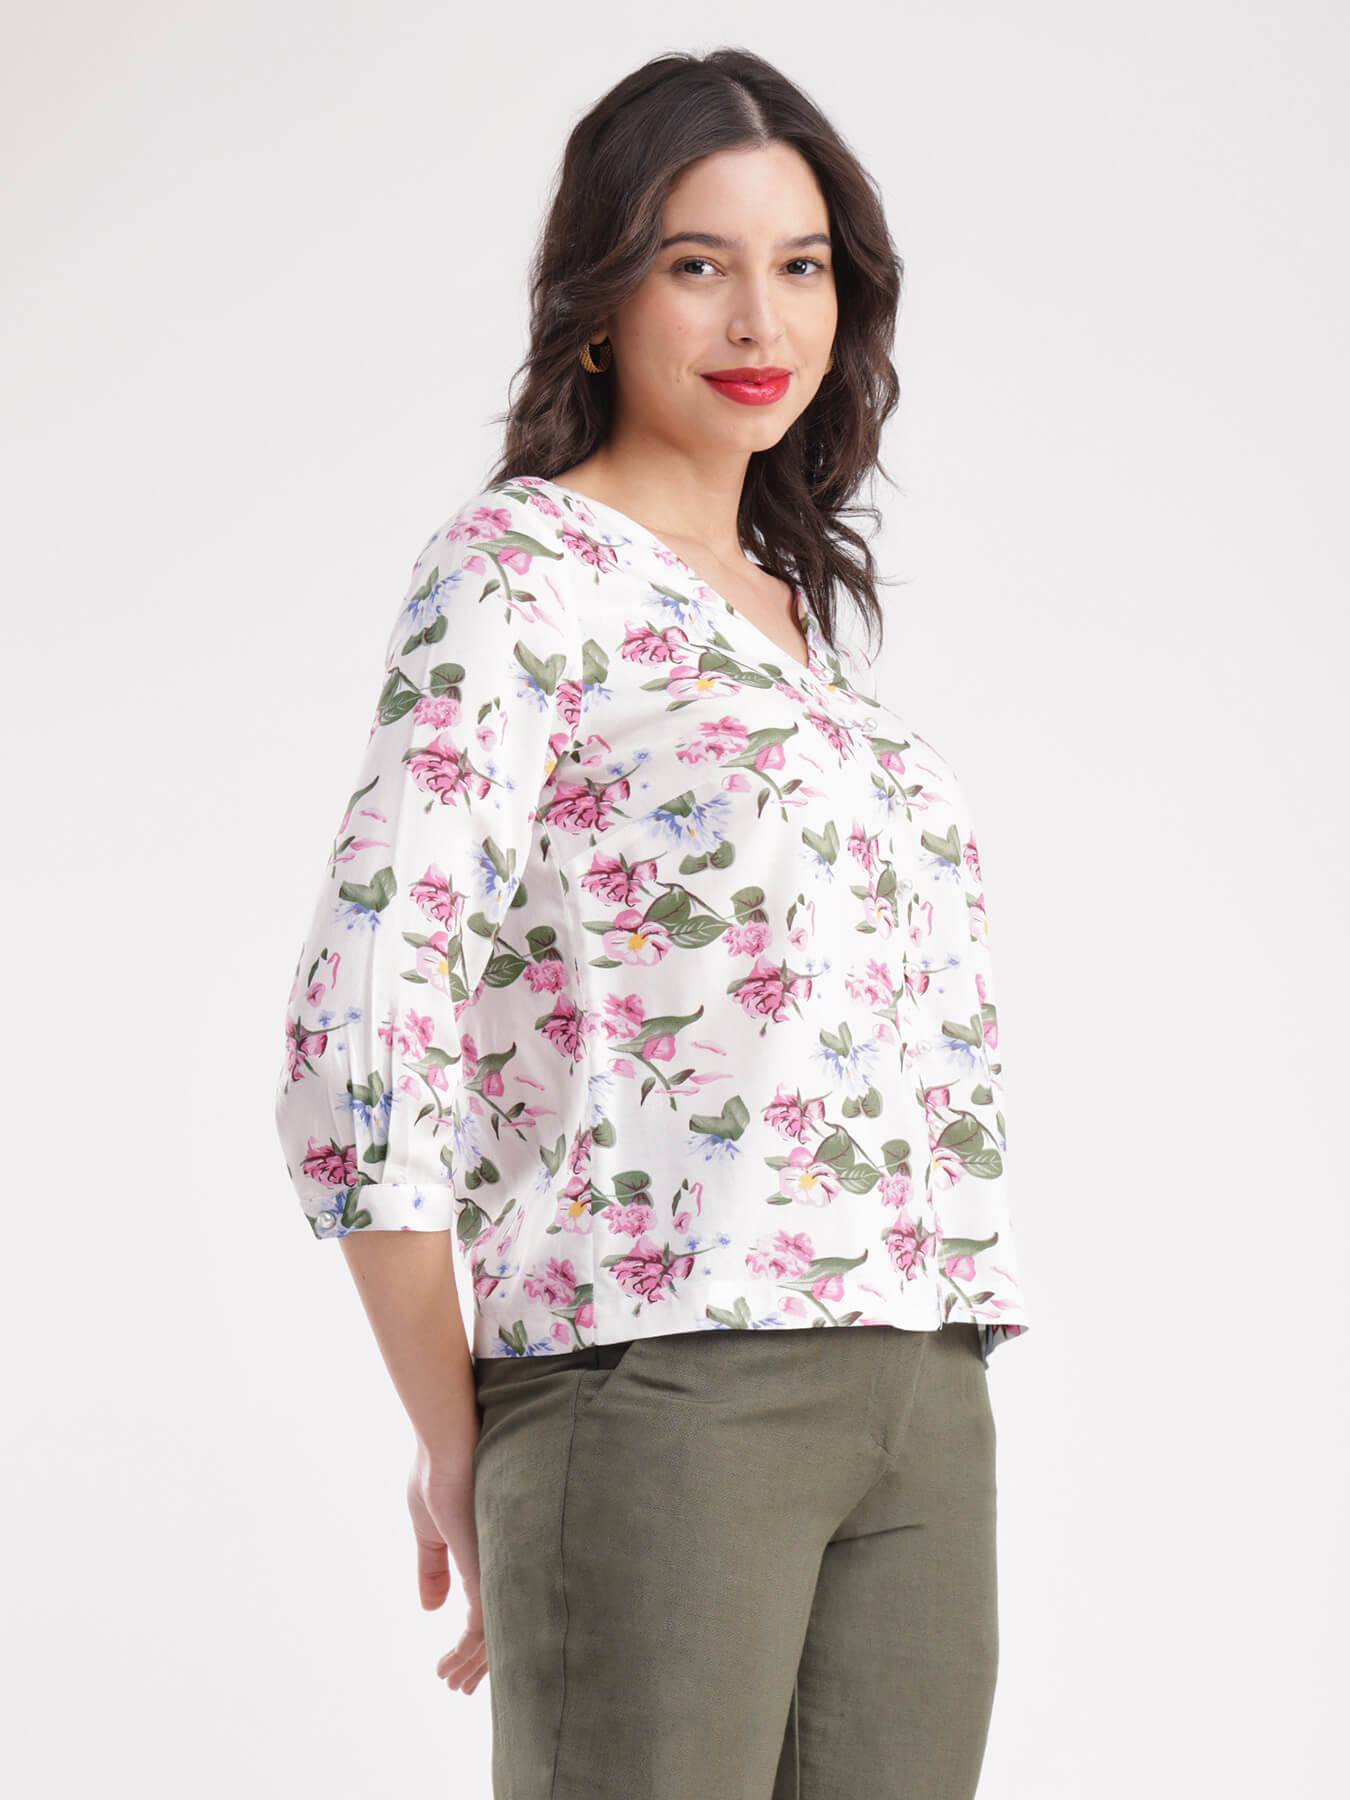 Floral Print V Neck Top - White And Pink